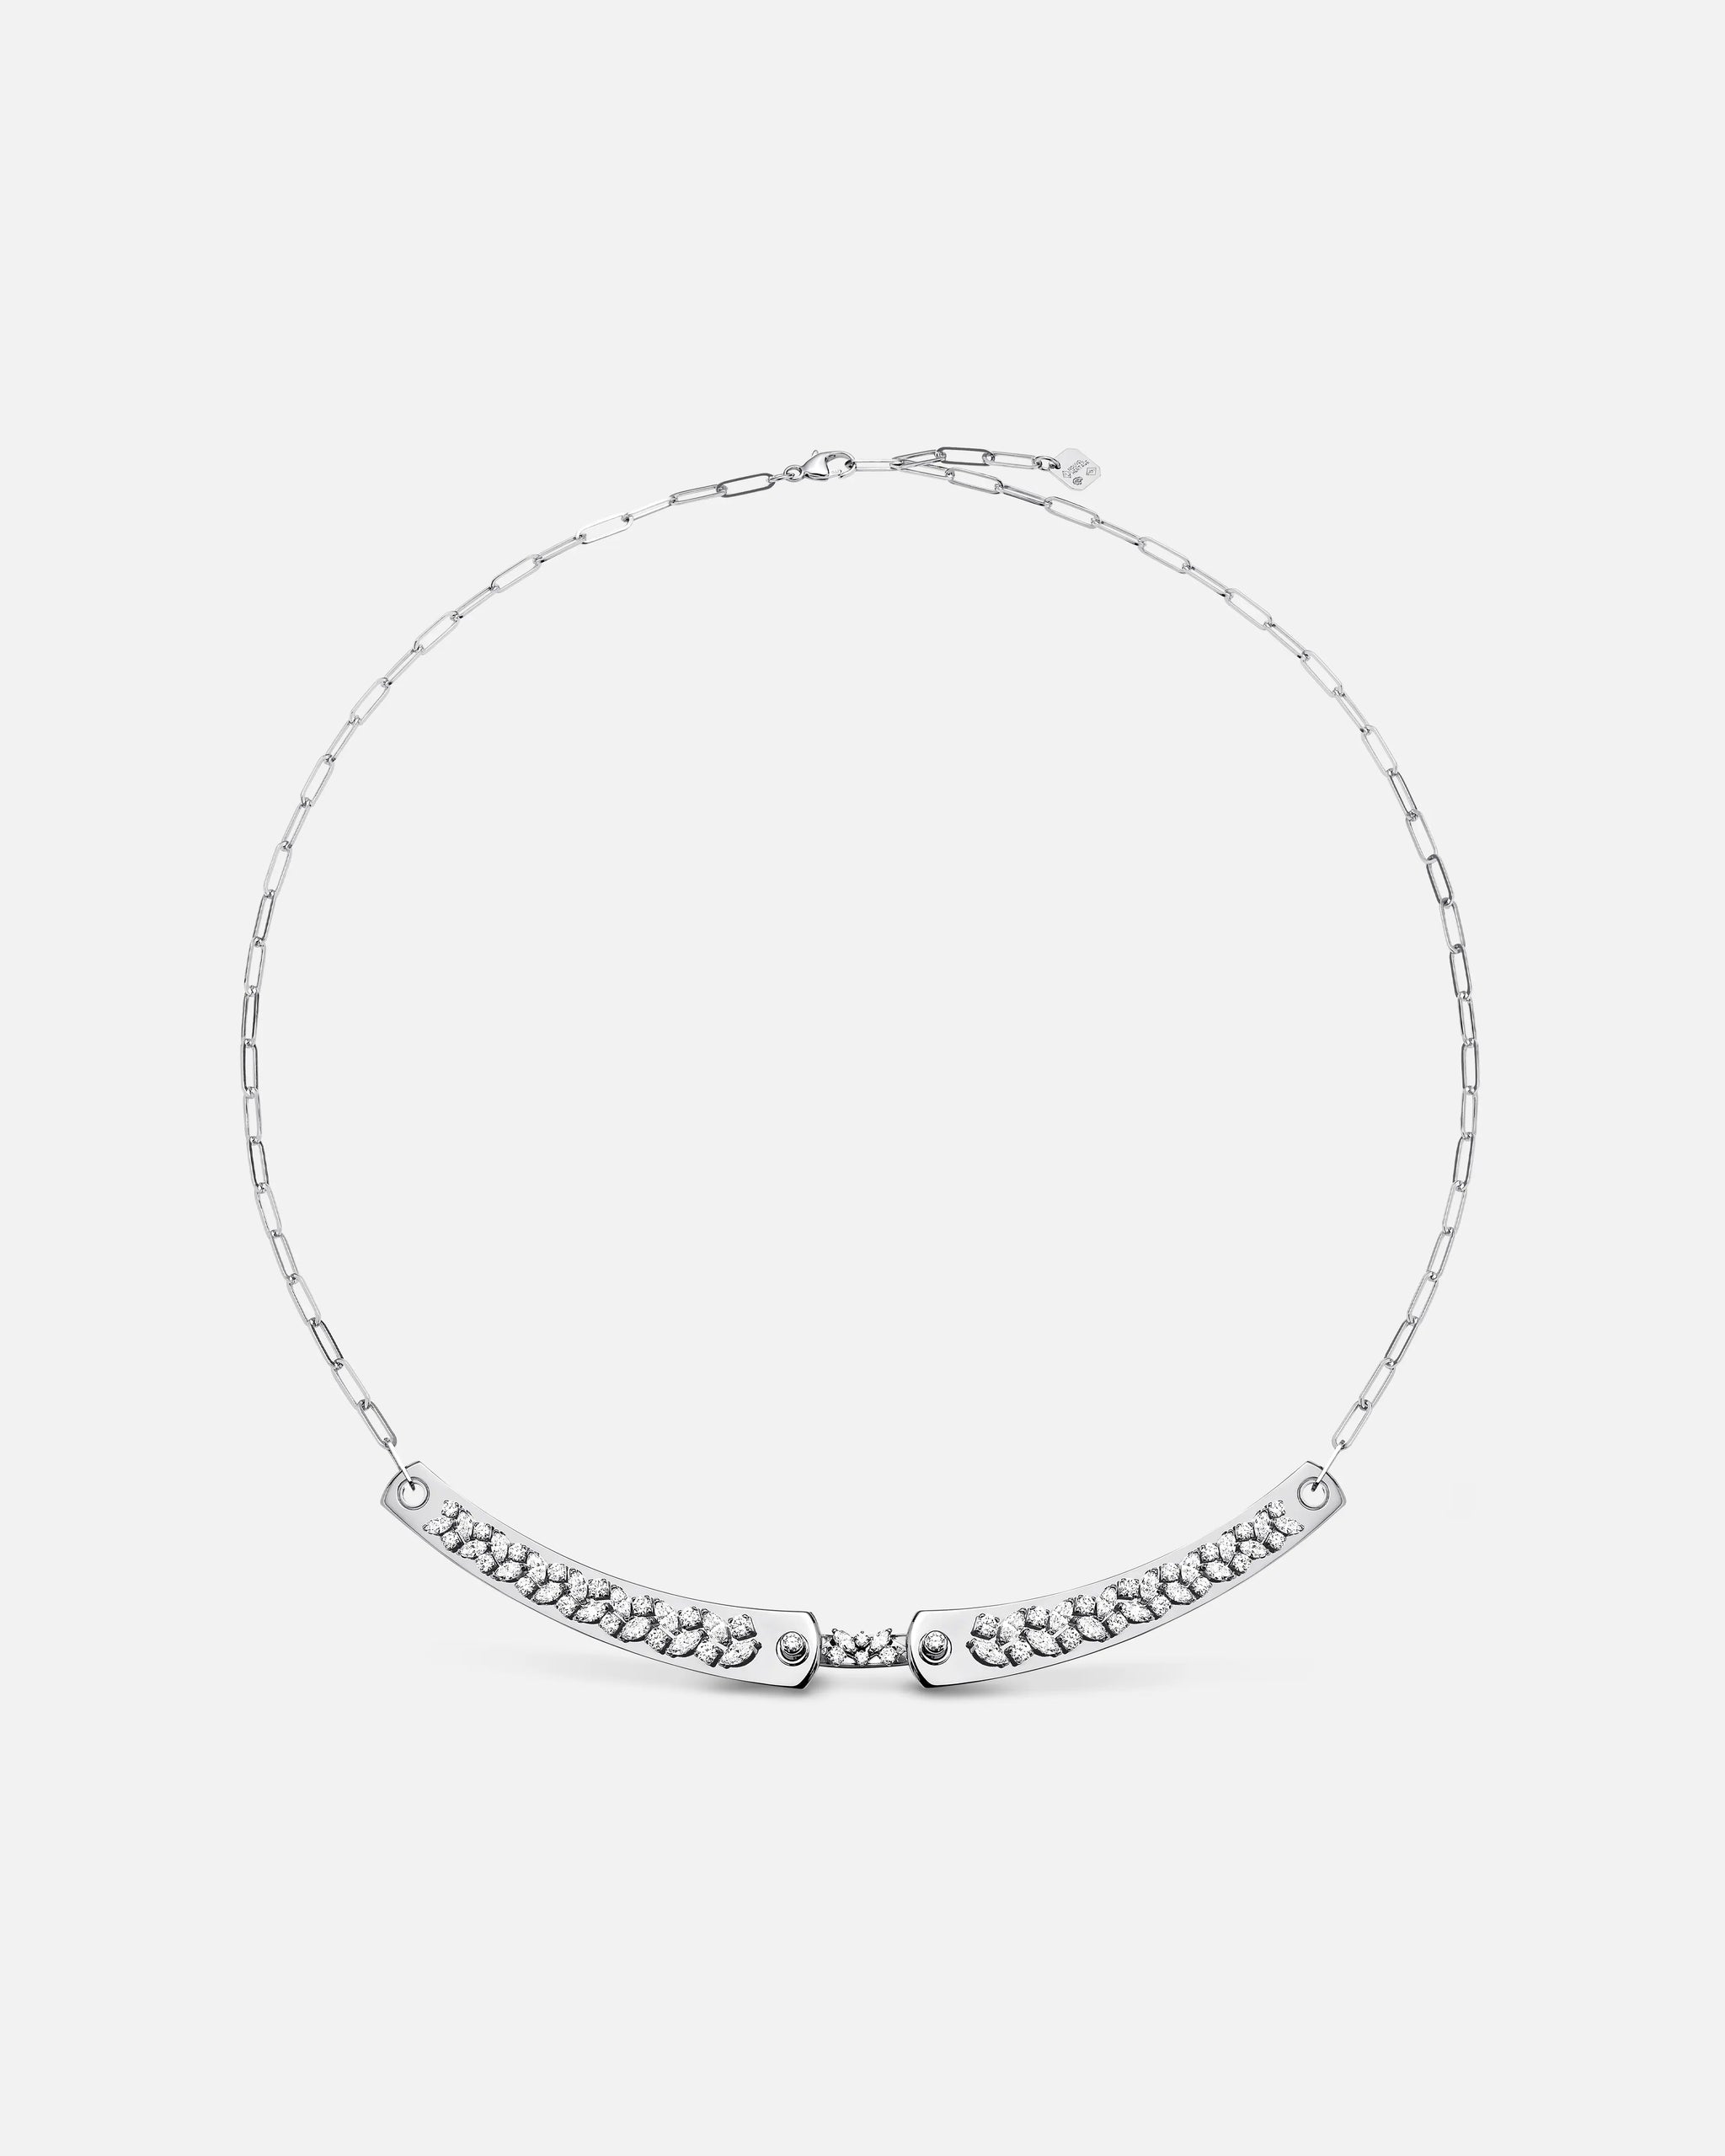 Soirée Mood Necklace in White Gold - 1 - Nouvel Heritage